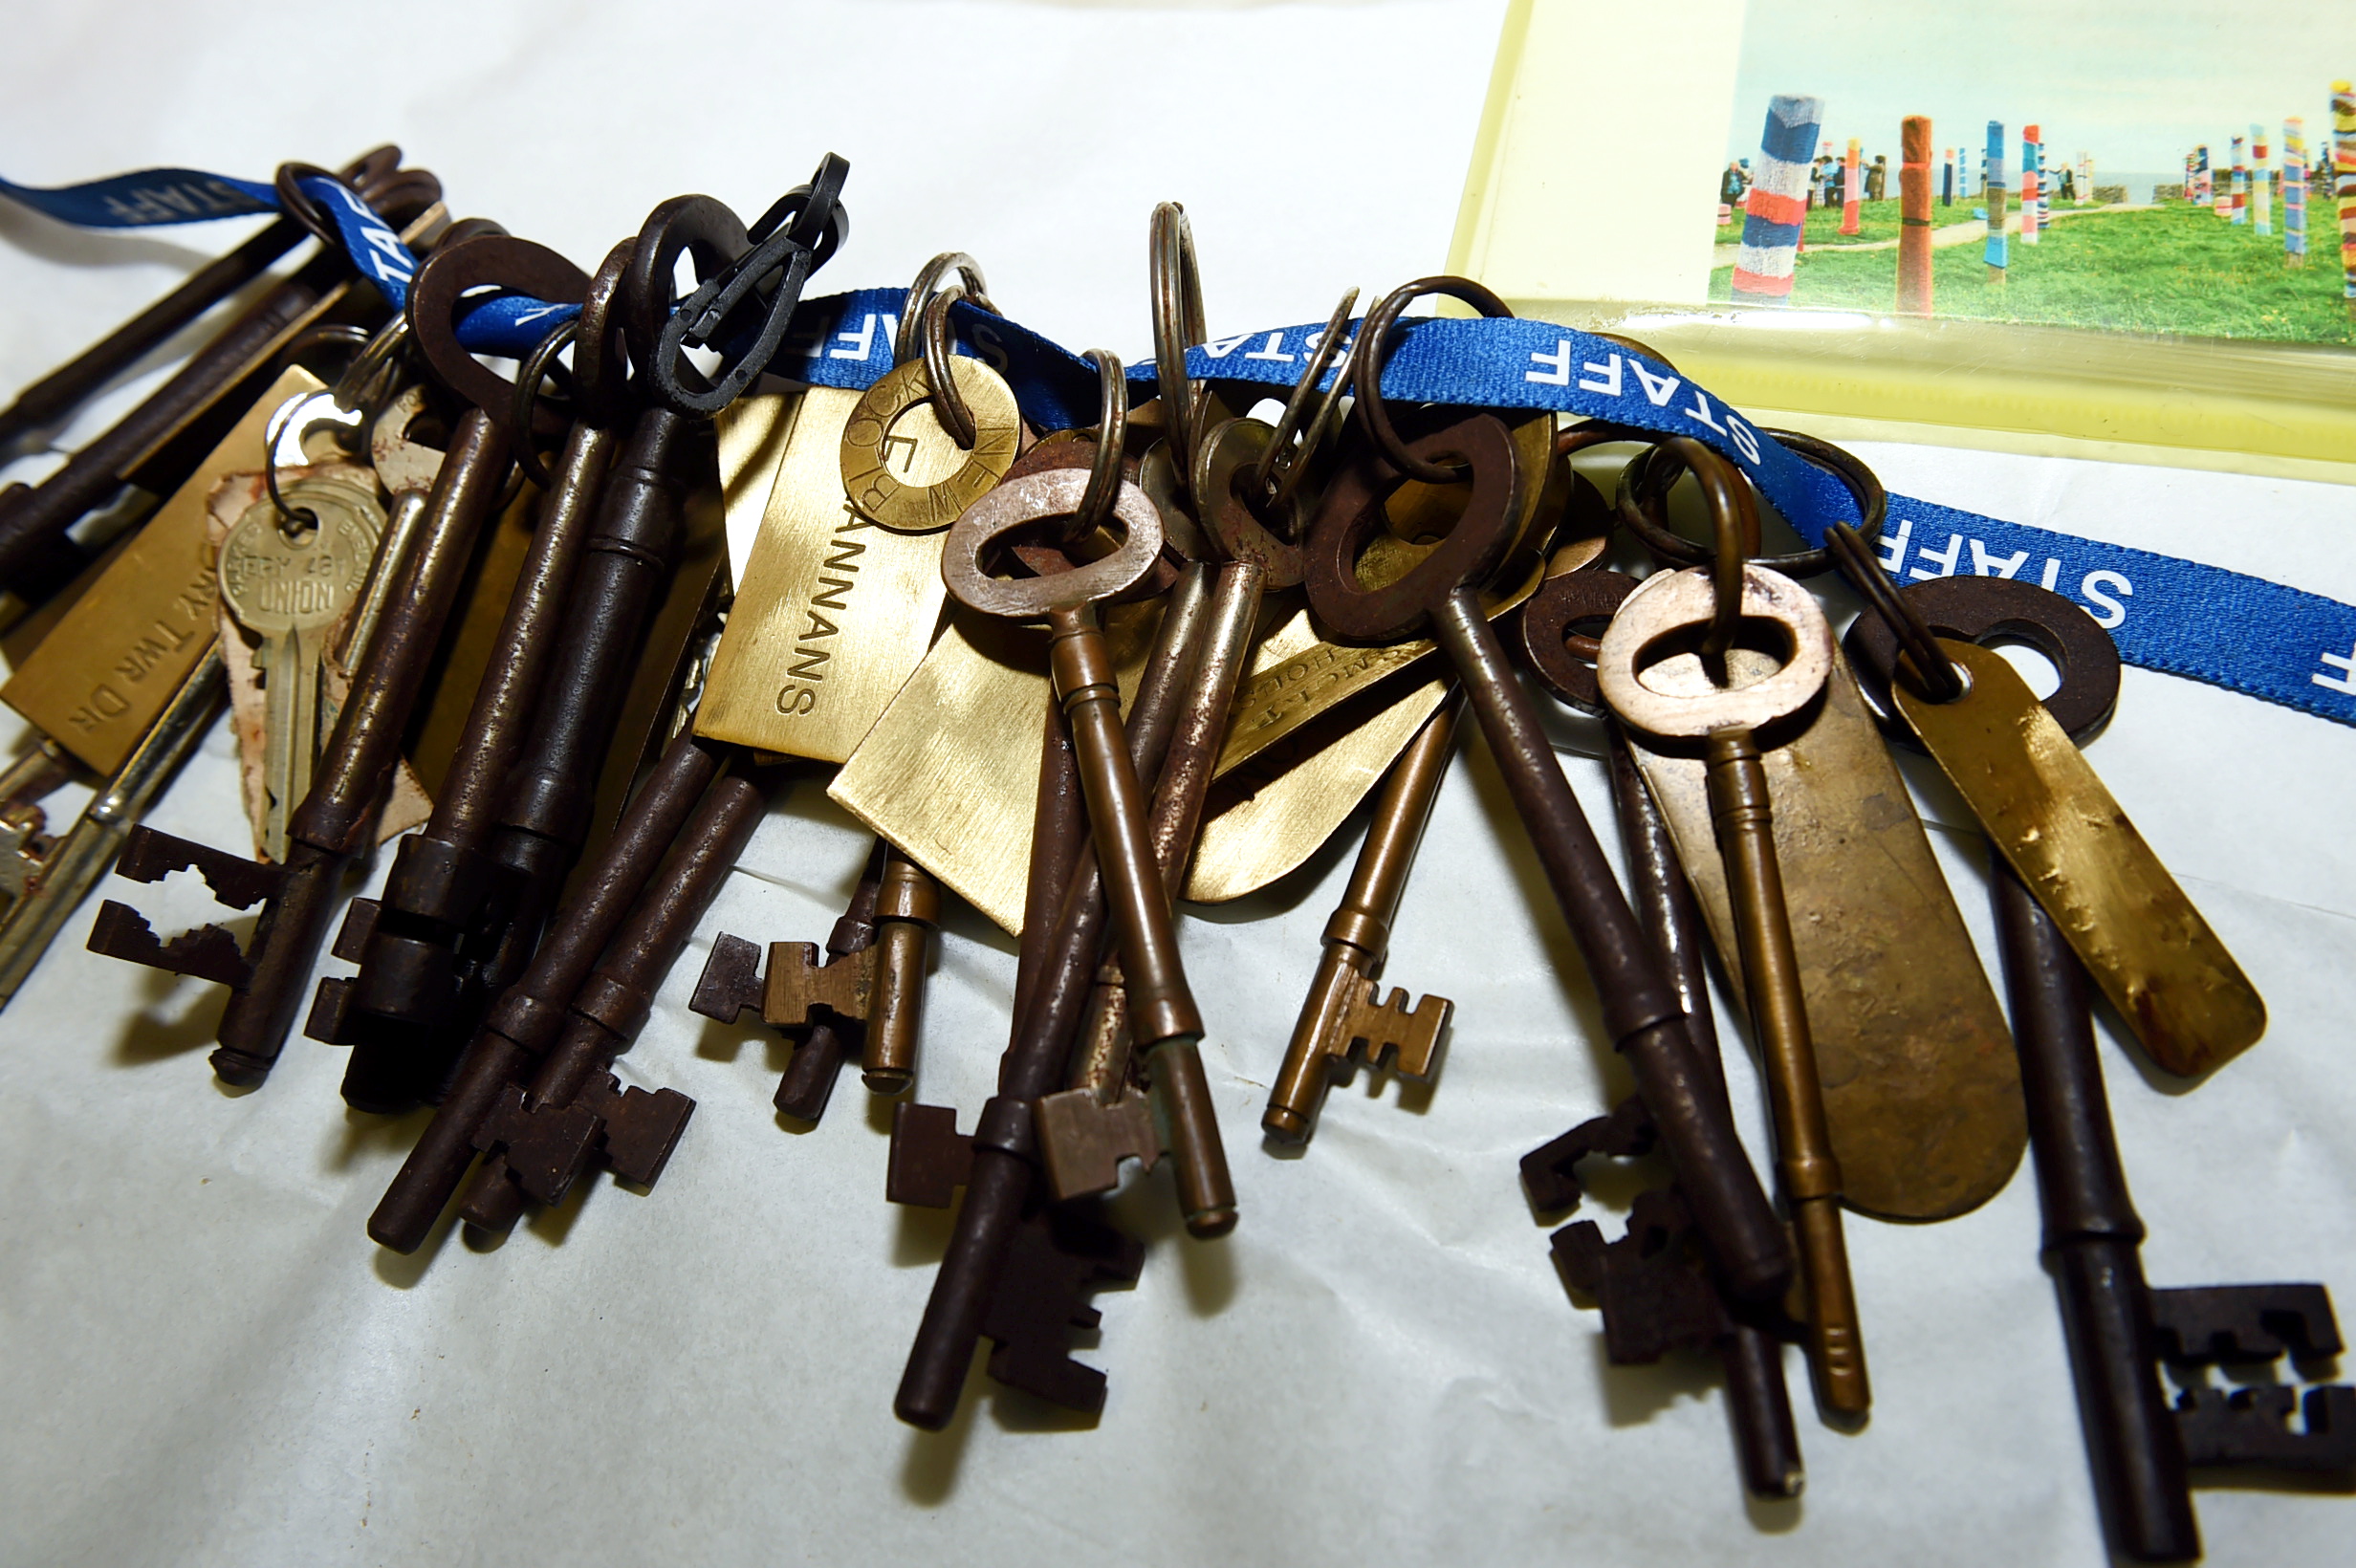 Some of the lighthouse keys when they were taken to the Scottish Lighthouse museum, Fraserburgh, on a visit last year
Picture by Jim Irvine  5-9-18